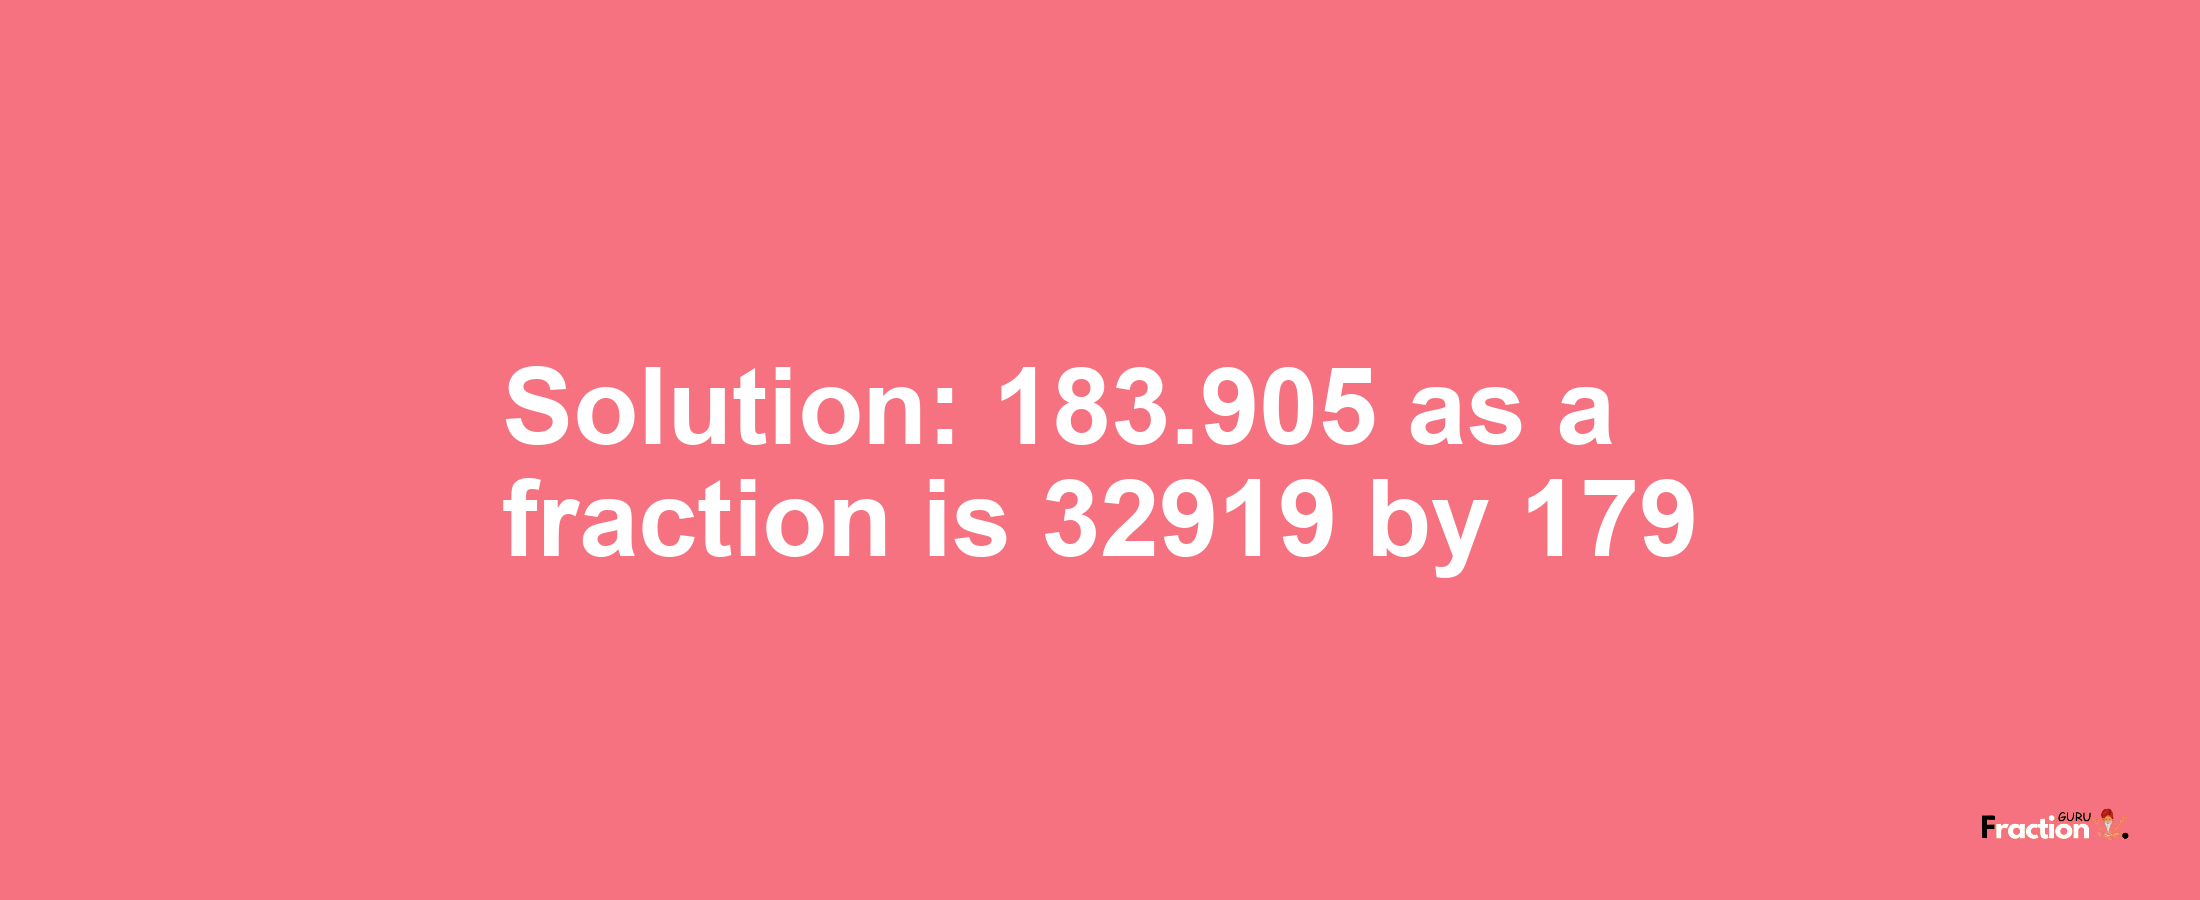 Solution:183.905 as a fraction is 32919/179